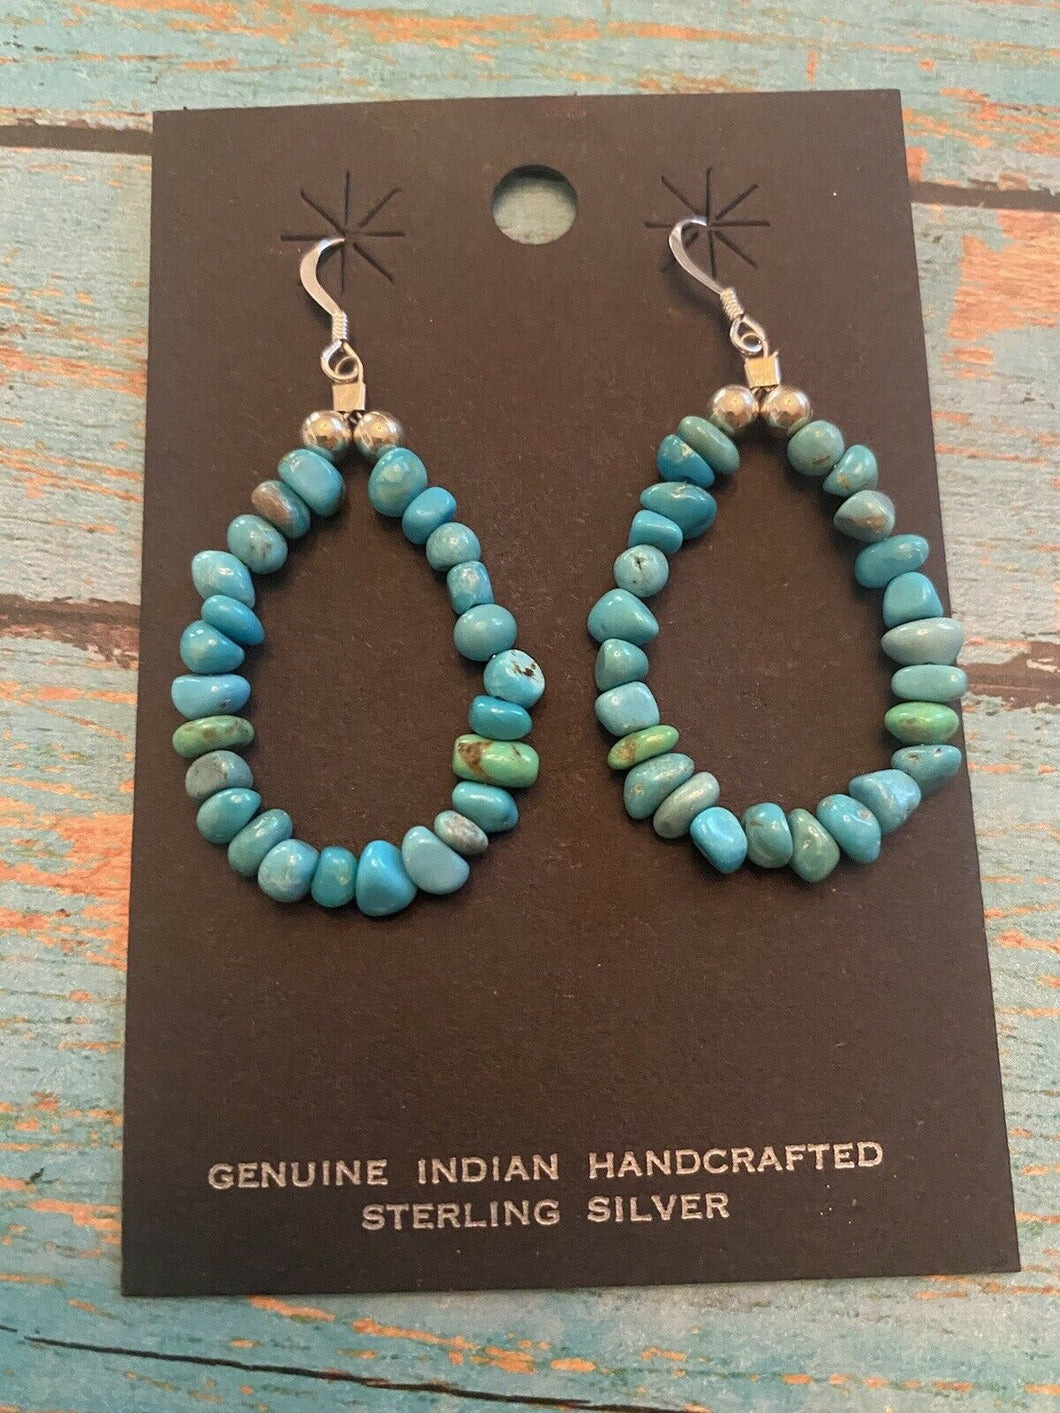 Navajo Turquoise And Sterling Silver Beaded Dangle Earrings